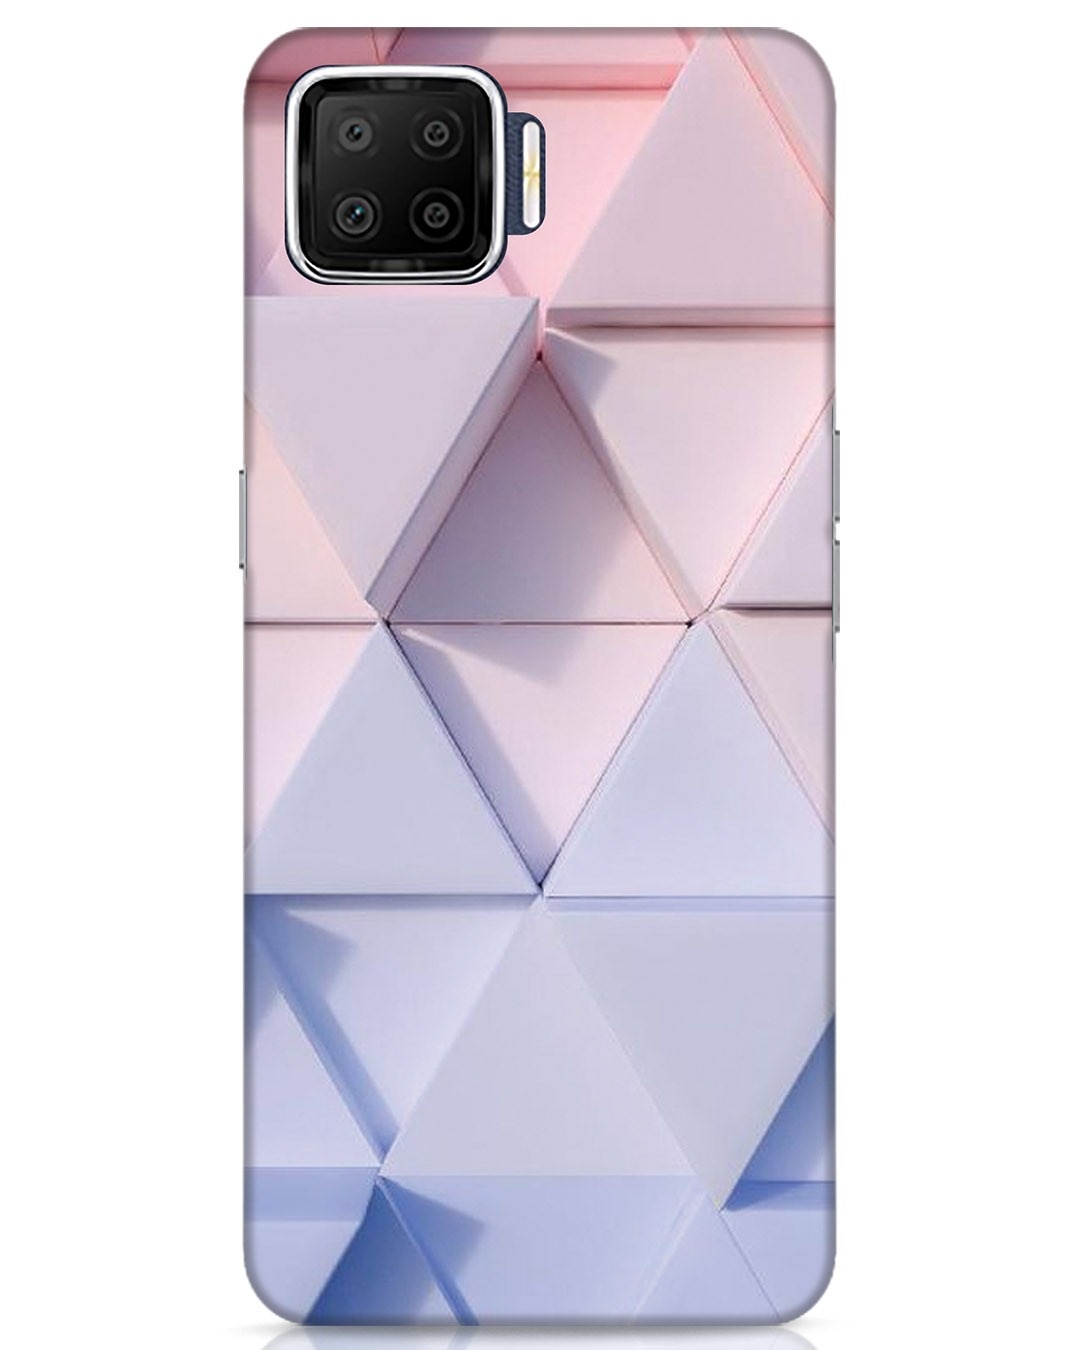 Buy 3d Prisma Oppo F17 Mobile Covers Online in India at Bewakoof